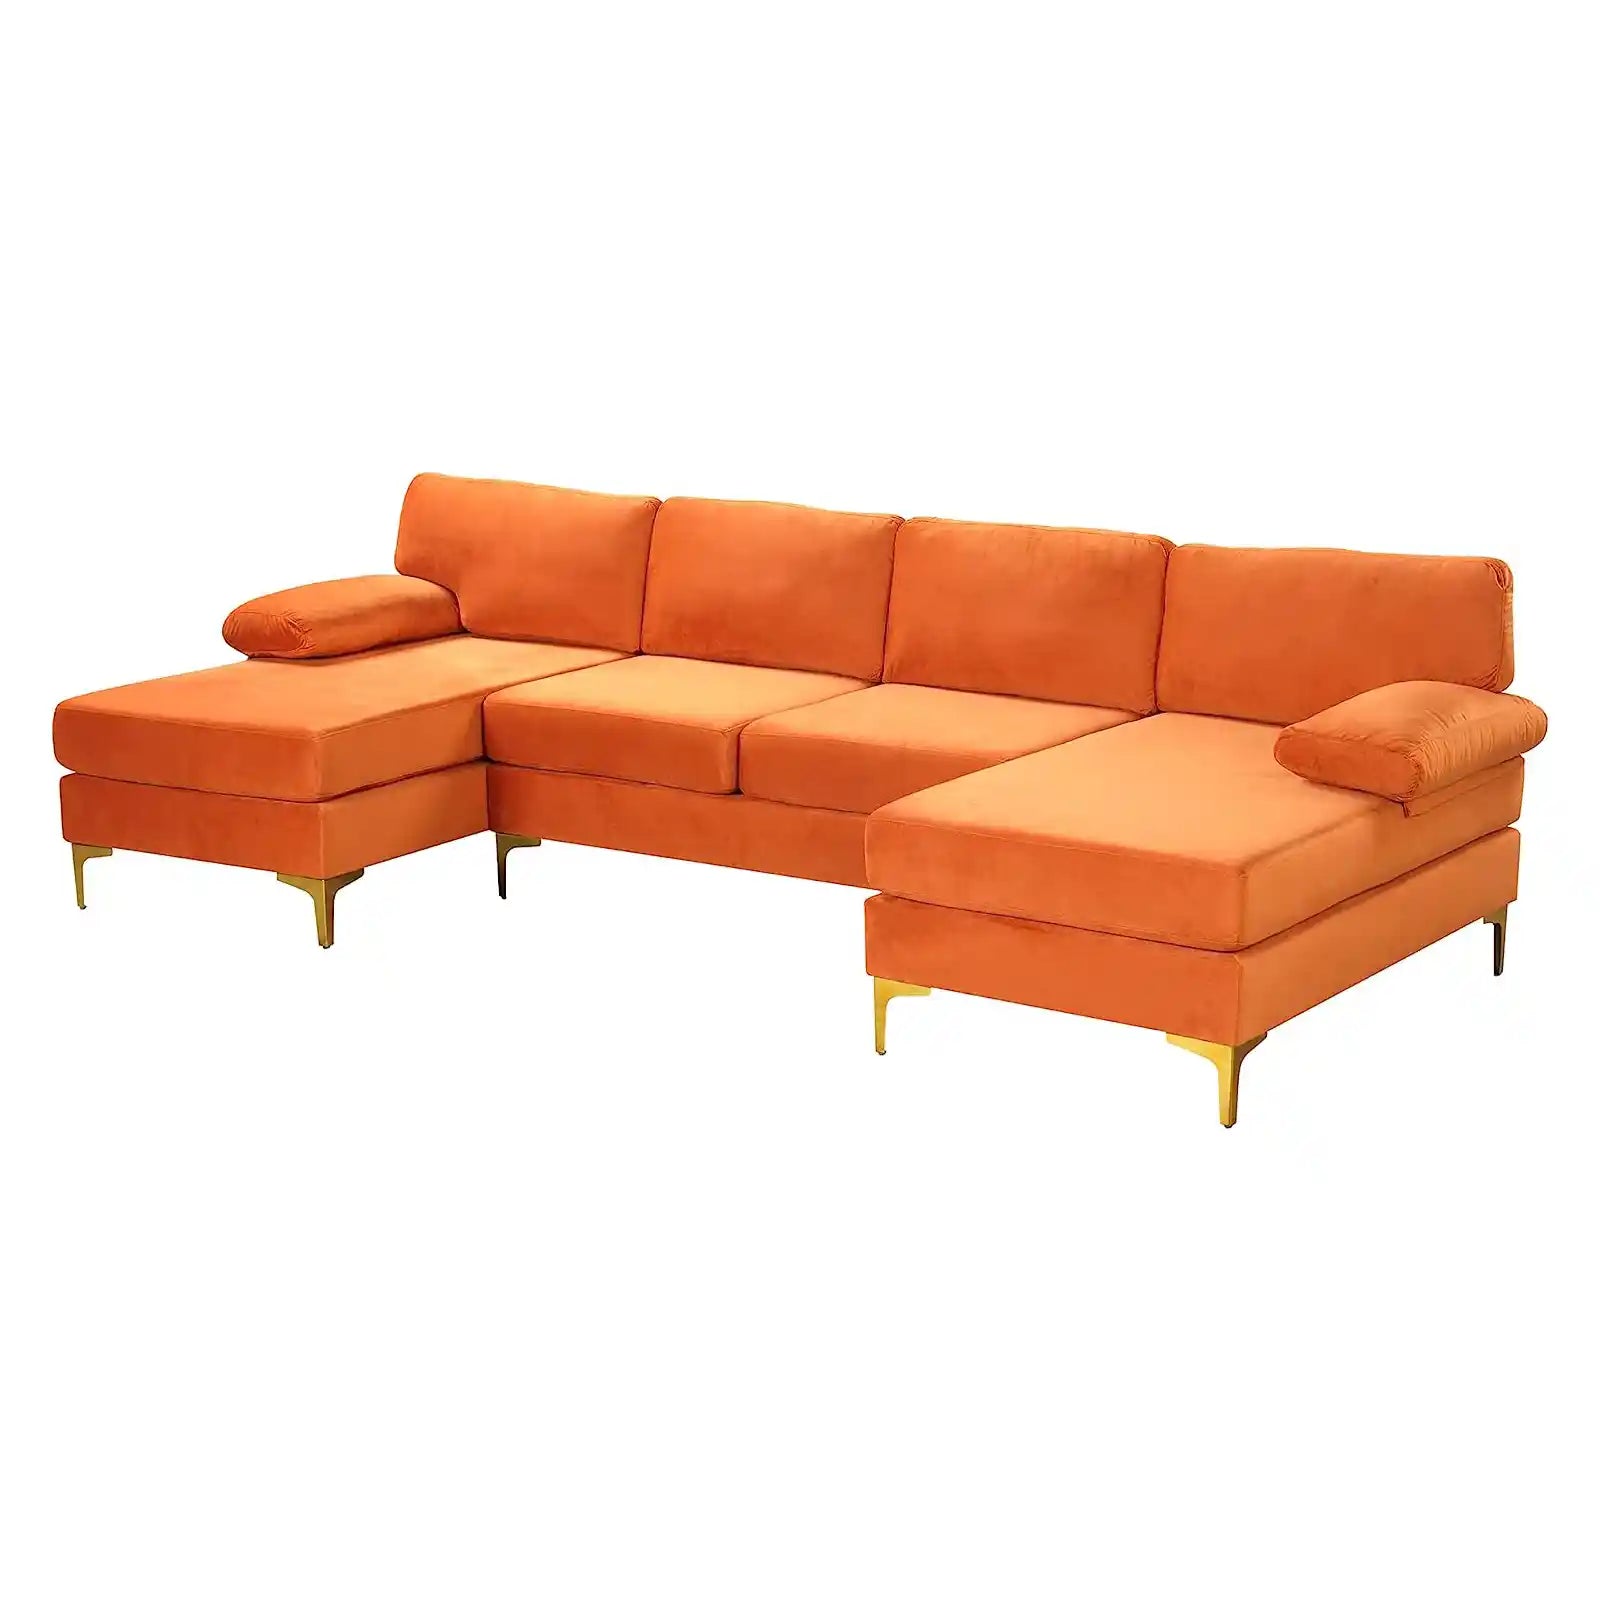 Modern Large Velvet Fabric U-Shape Sectional Sofa, Double Extra Wide Chaise Lounge Couch with Gold Legs